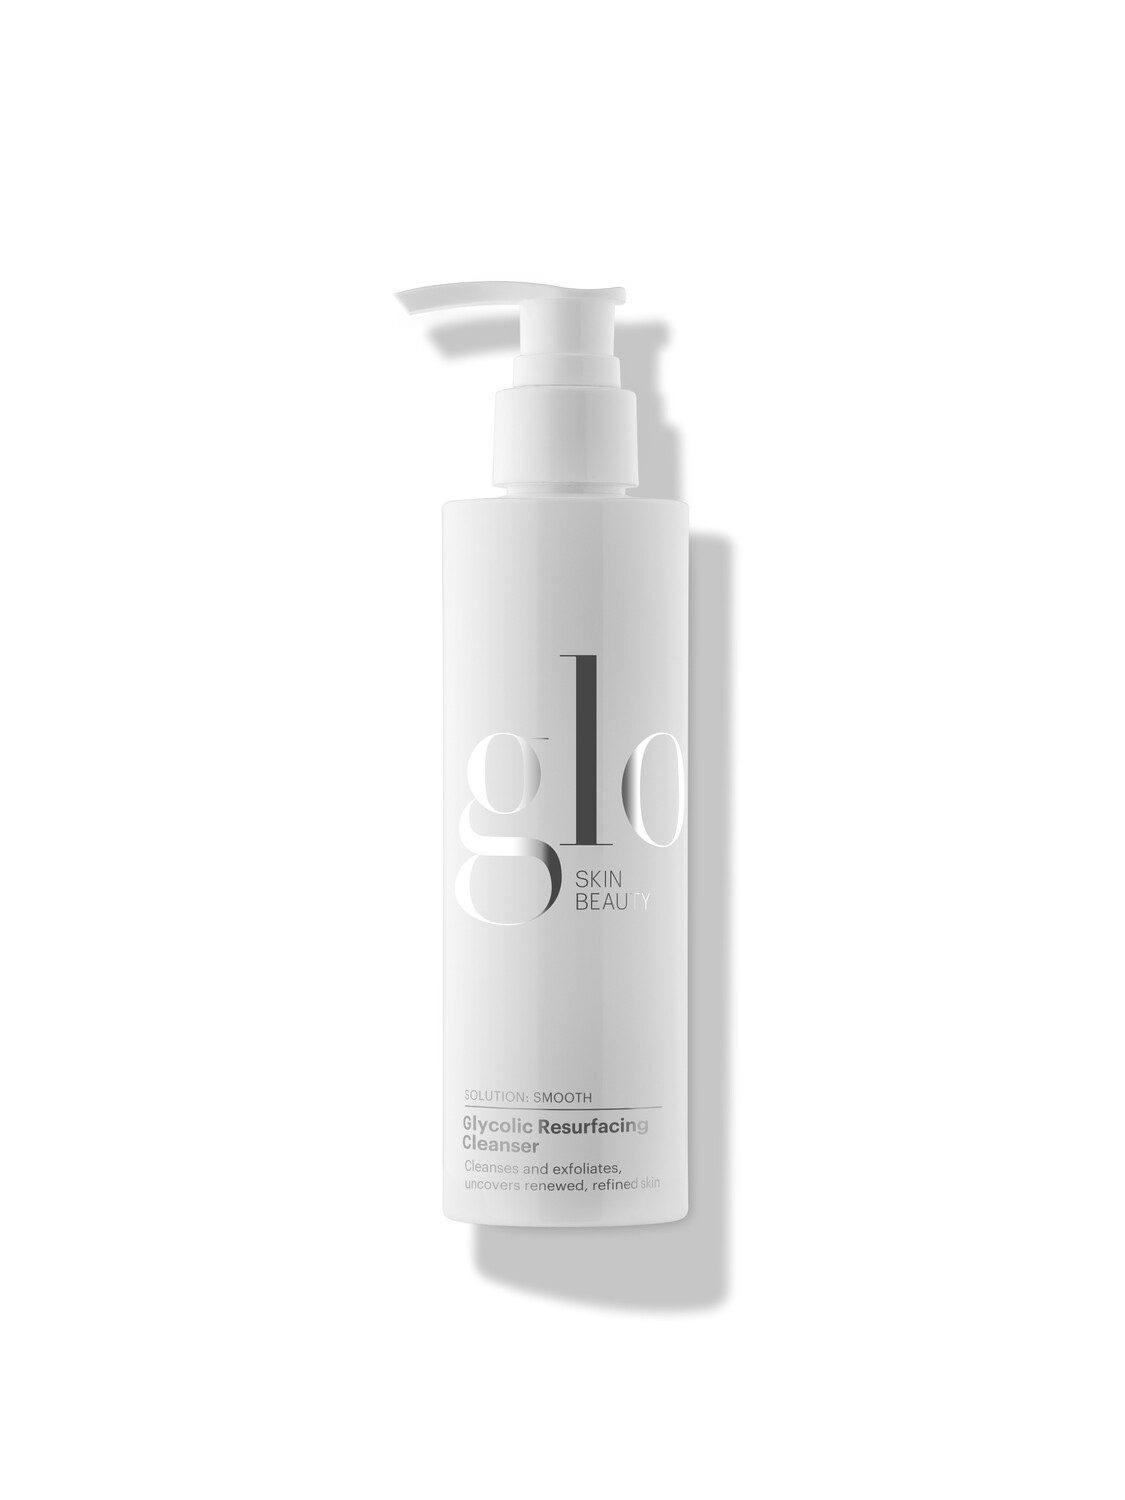 Glycolic Resurfacing Cleanser